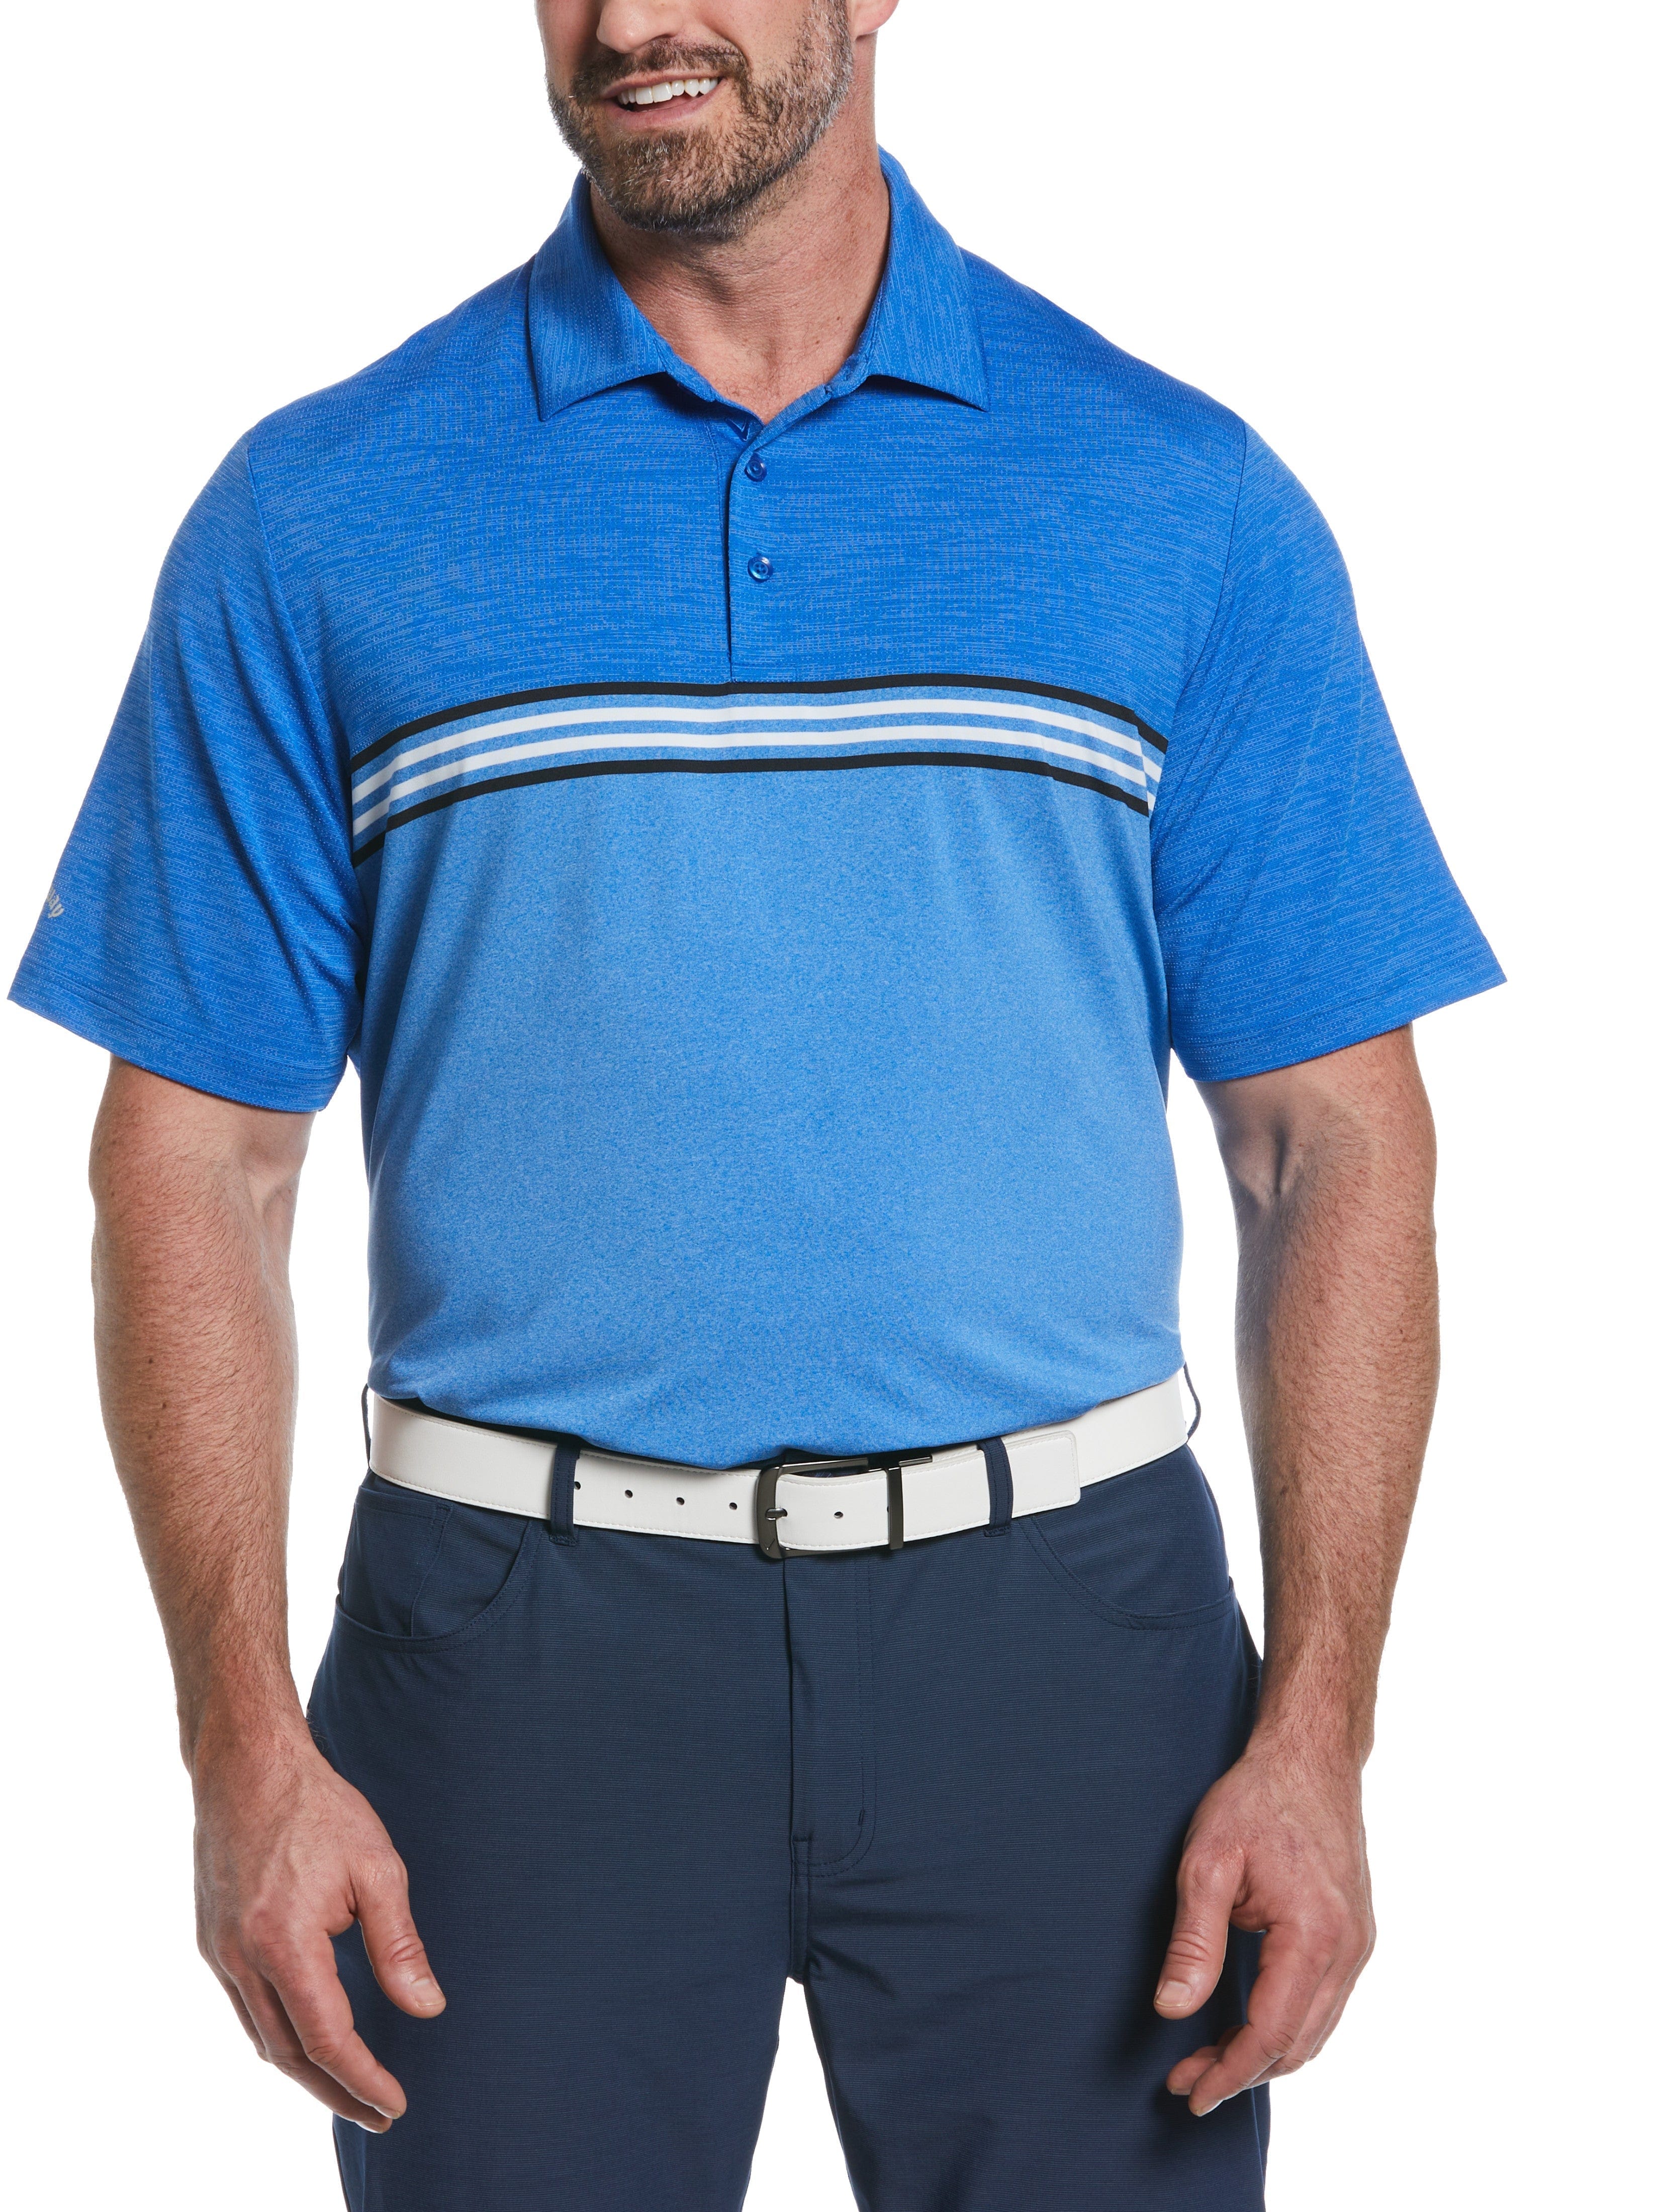 Callaway Apparel Mens Big & Tall Yarn Dyed Ventilated Jaspe Engineered Stripe Golf Polo Shirt, Size 1X, Magnetic Heather Blue, Polyester/Recycled Pol